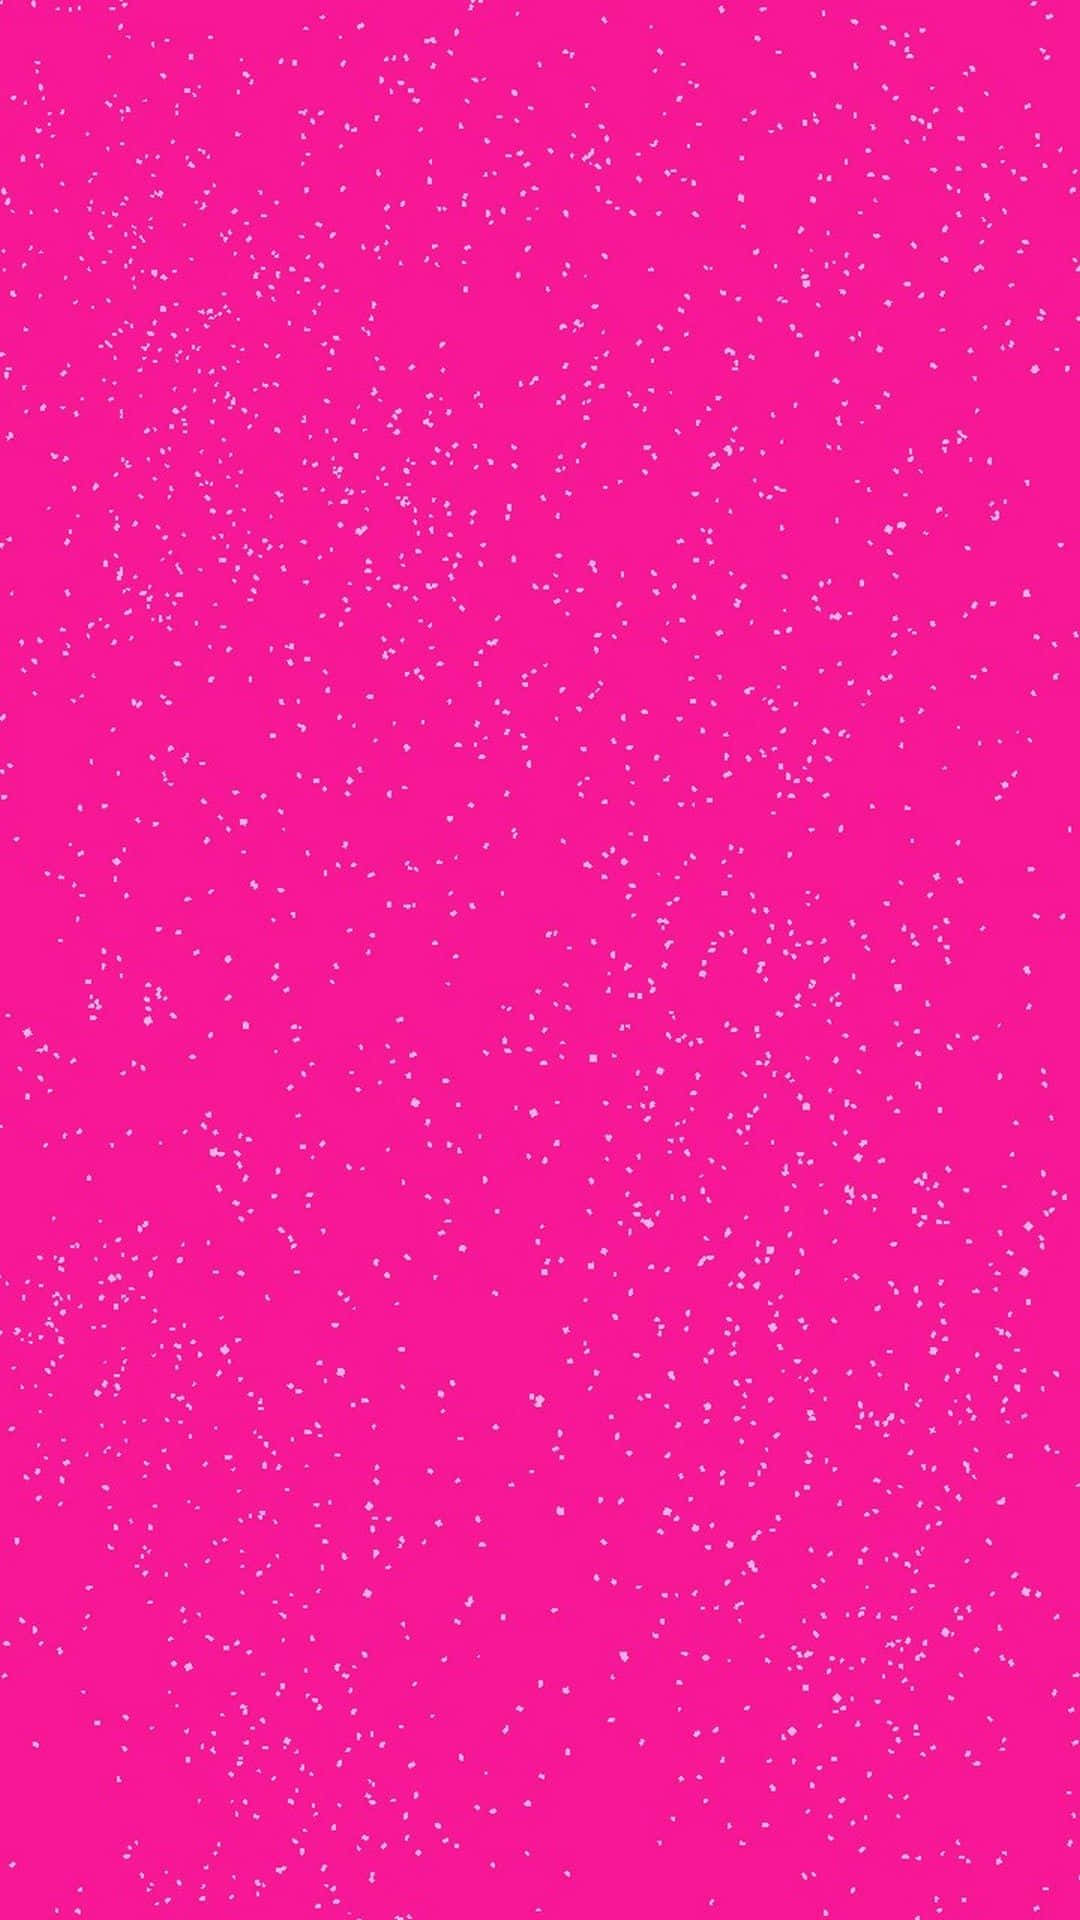 100 Pink Aesthetic Wallpaper Backgrounds You Need For Your Phone Right Now